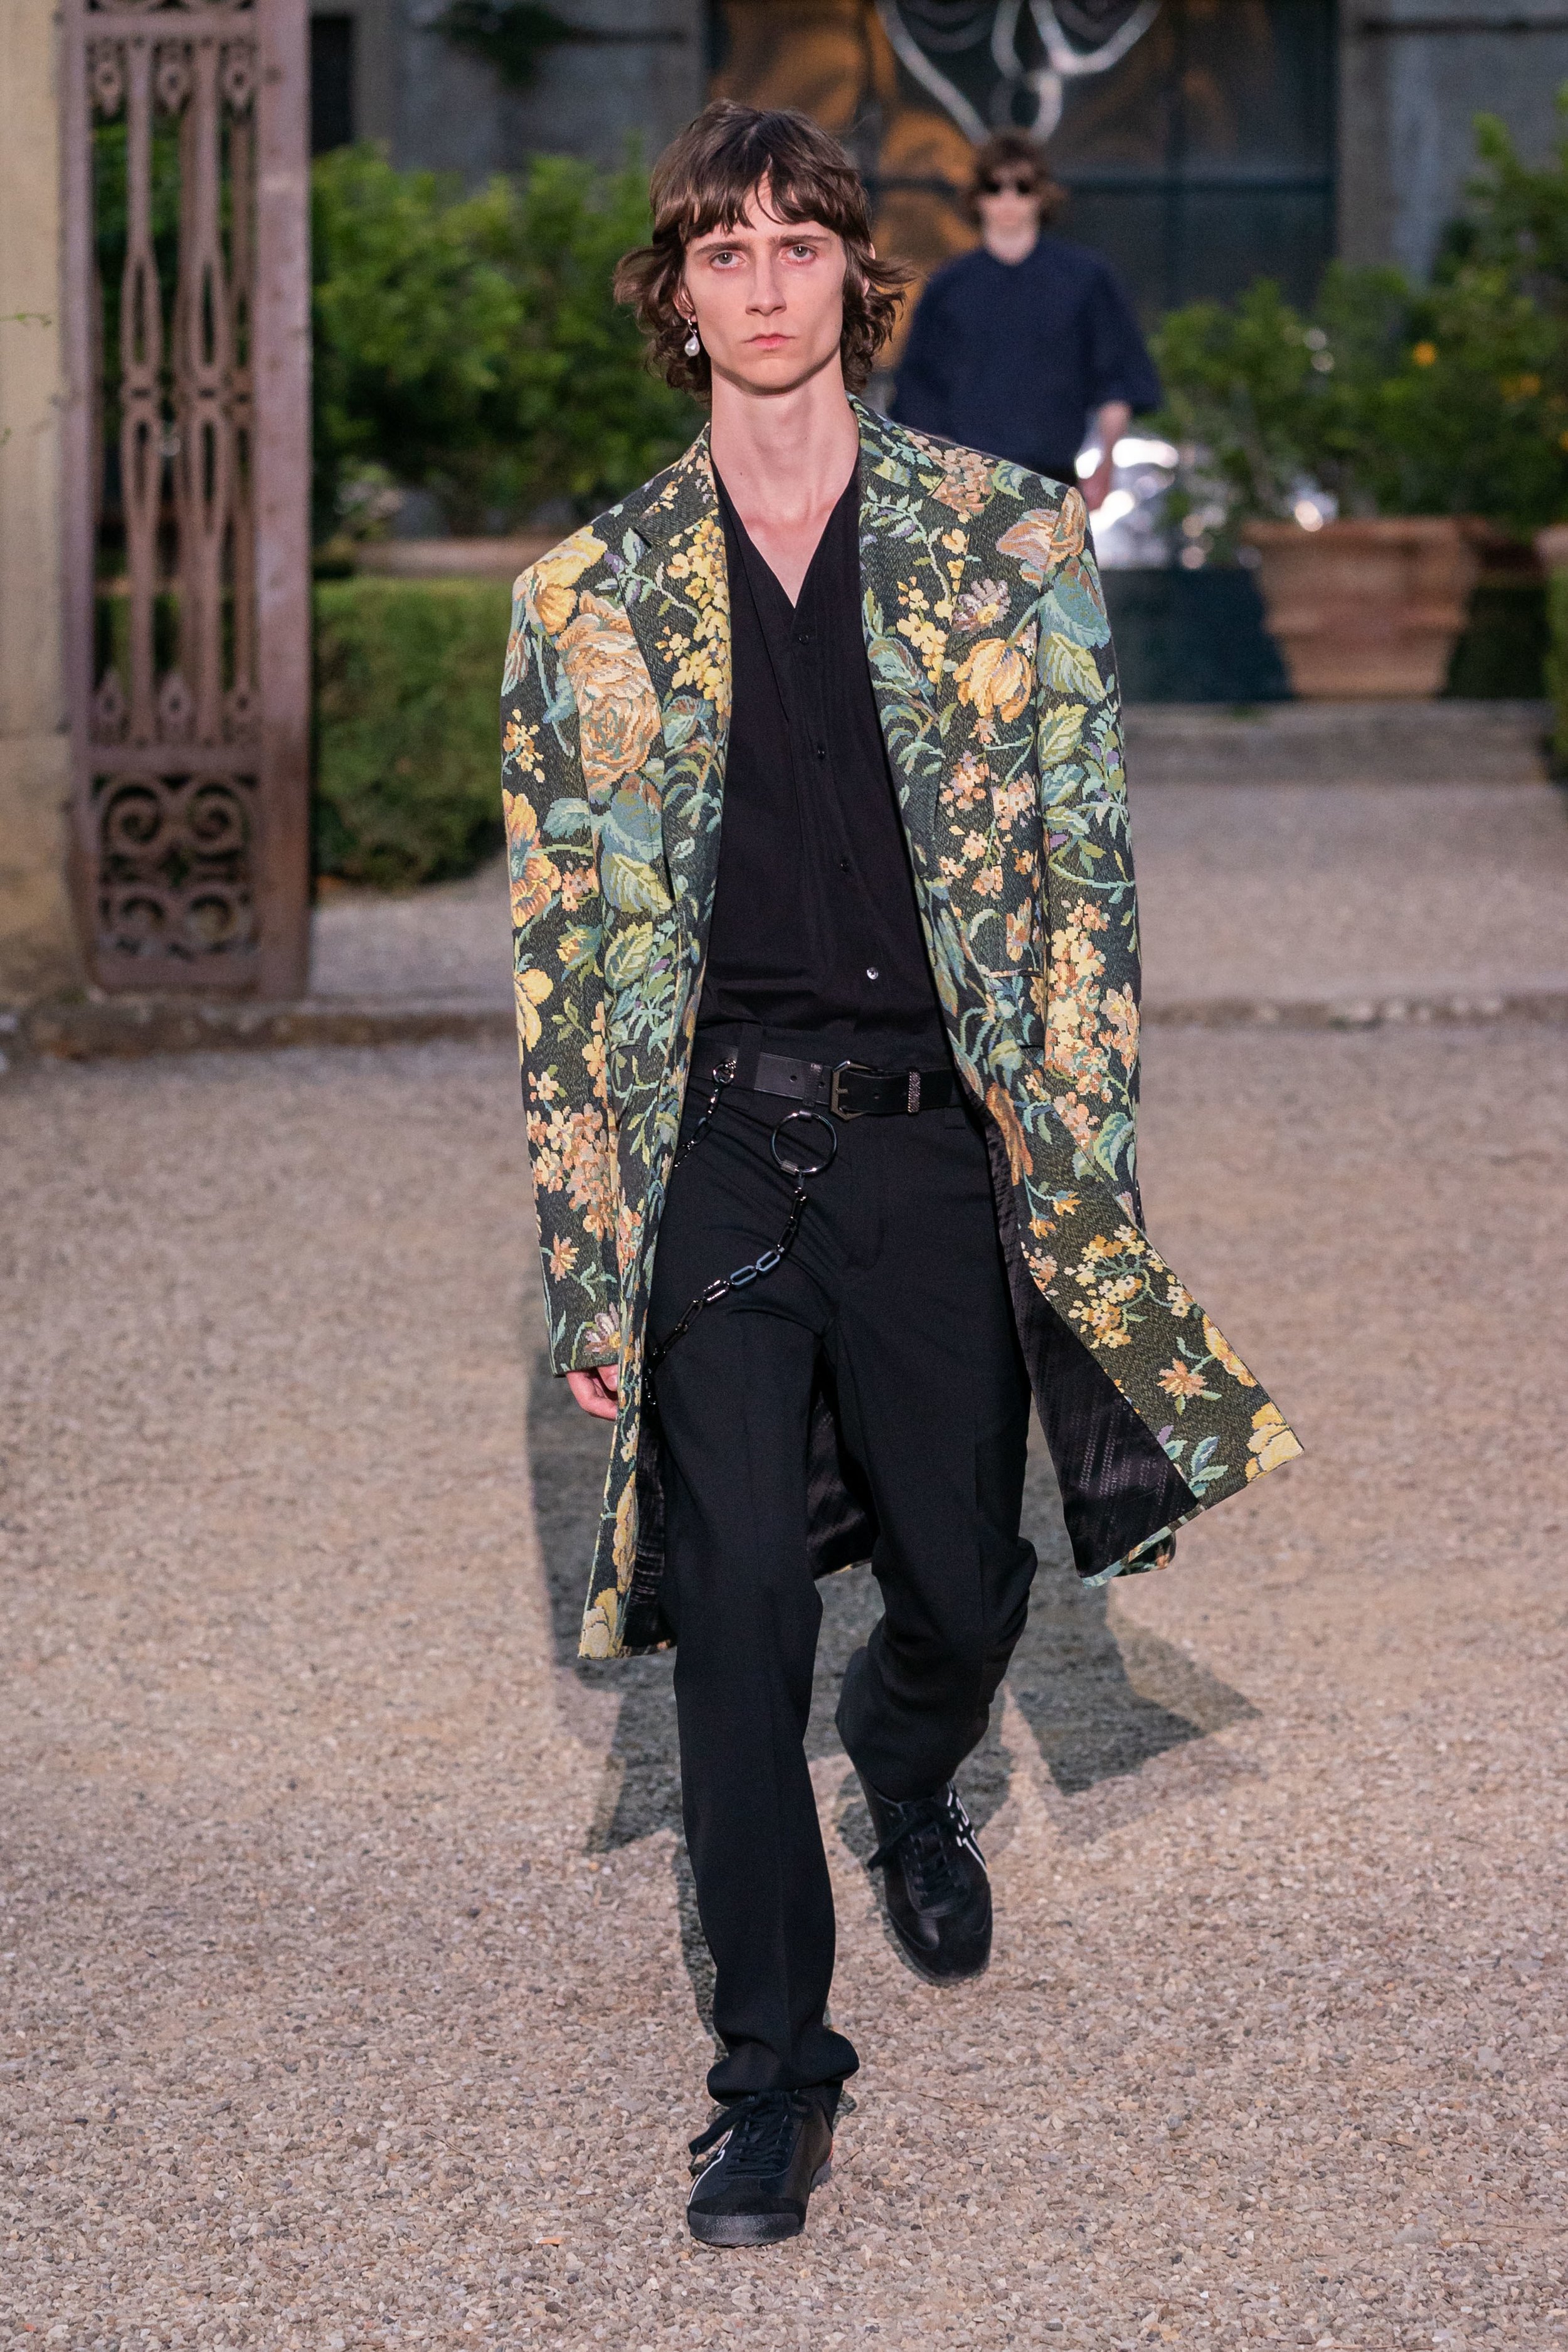 Behind_The_Blinds_Magazine_Givenchy_Men_SS20_Pitti_ALE0710.jpg